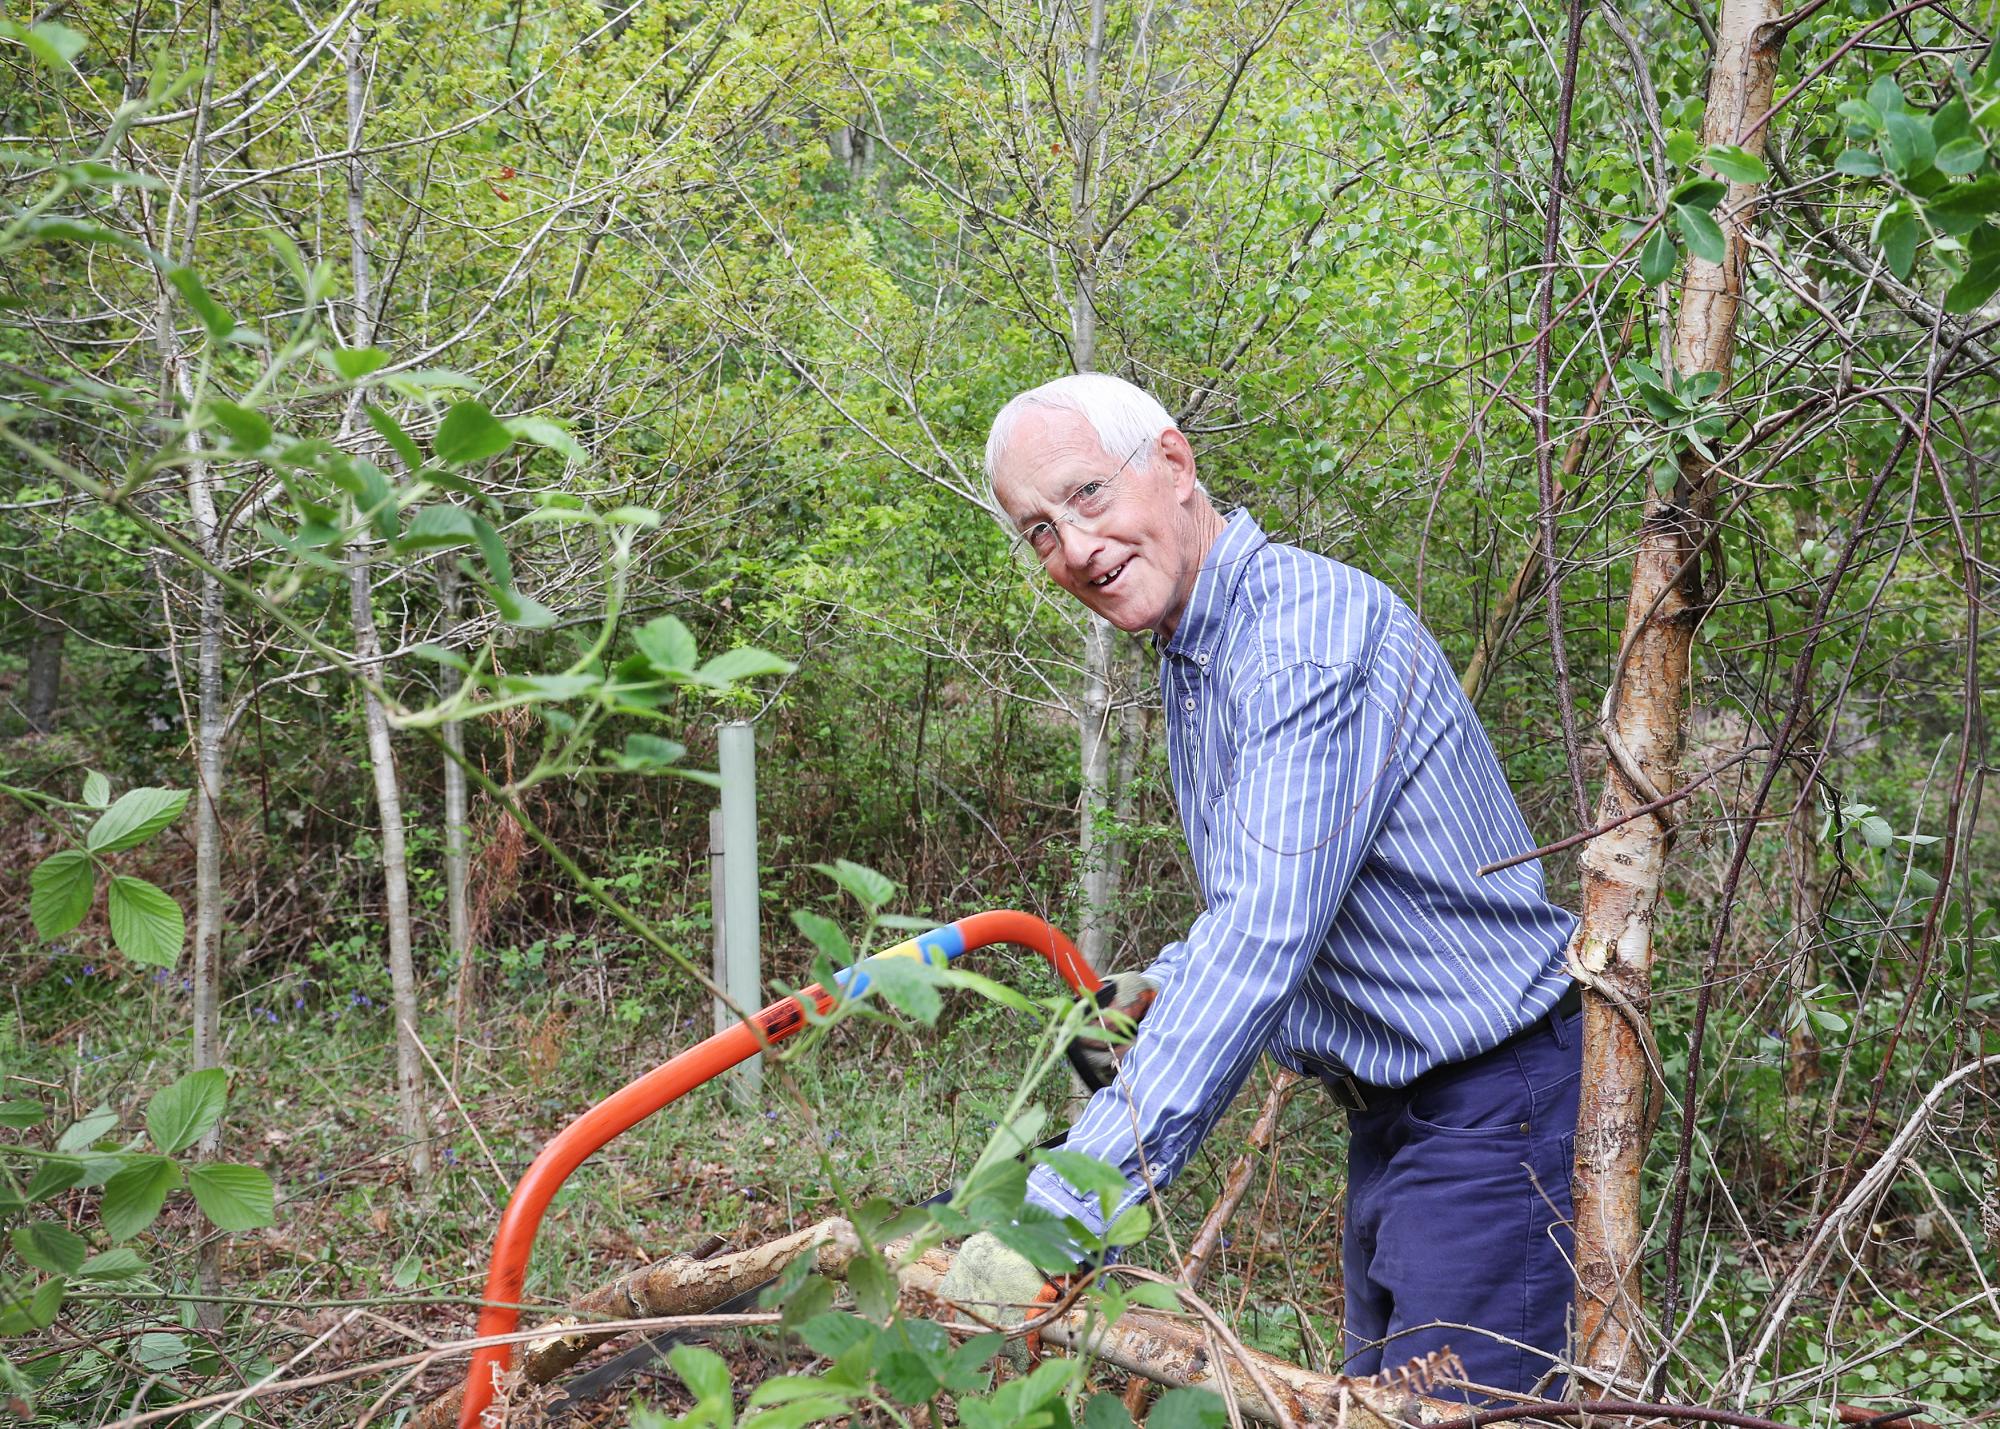 Volunteer Leader Steve using a saw to trim trees in the Forest